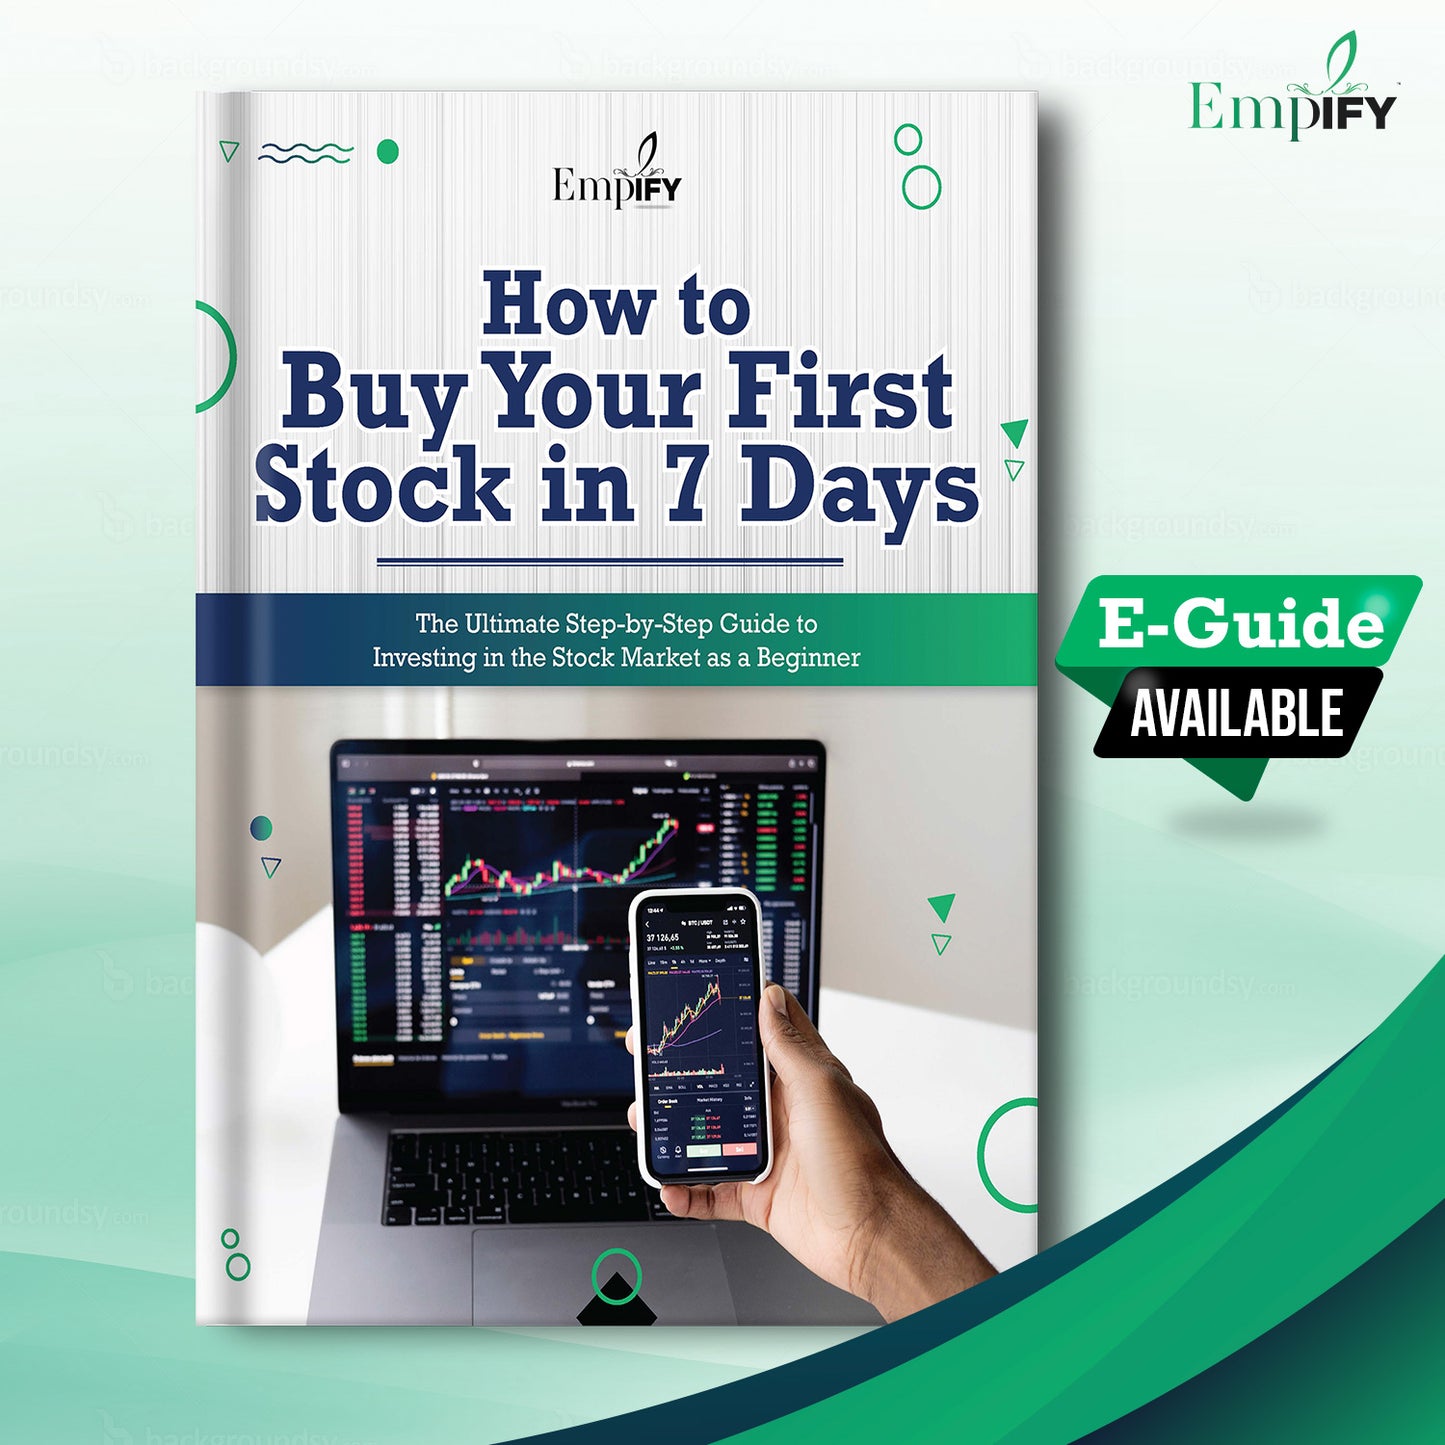 How to Buy Your First Stock in 7 Days Blueprint E-Guide